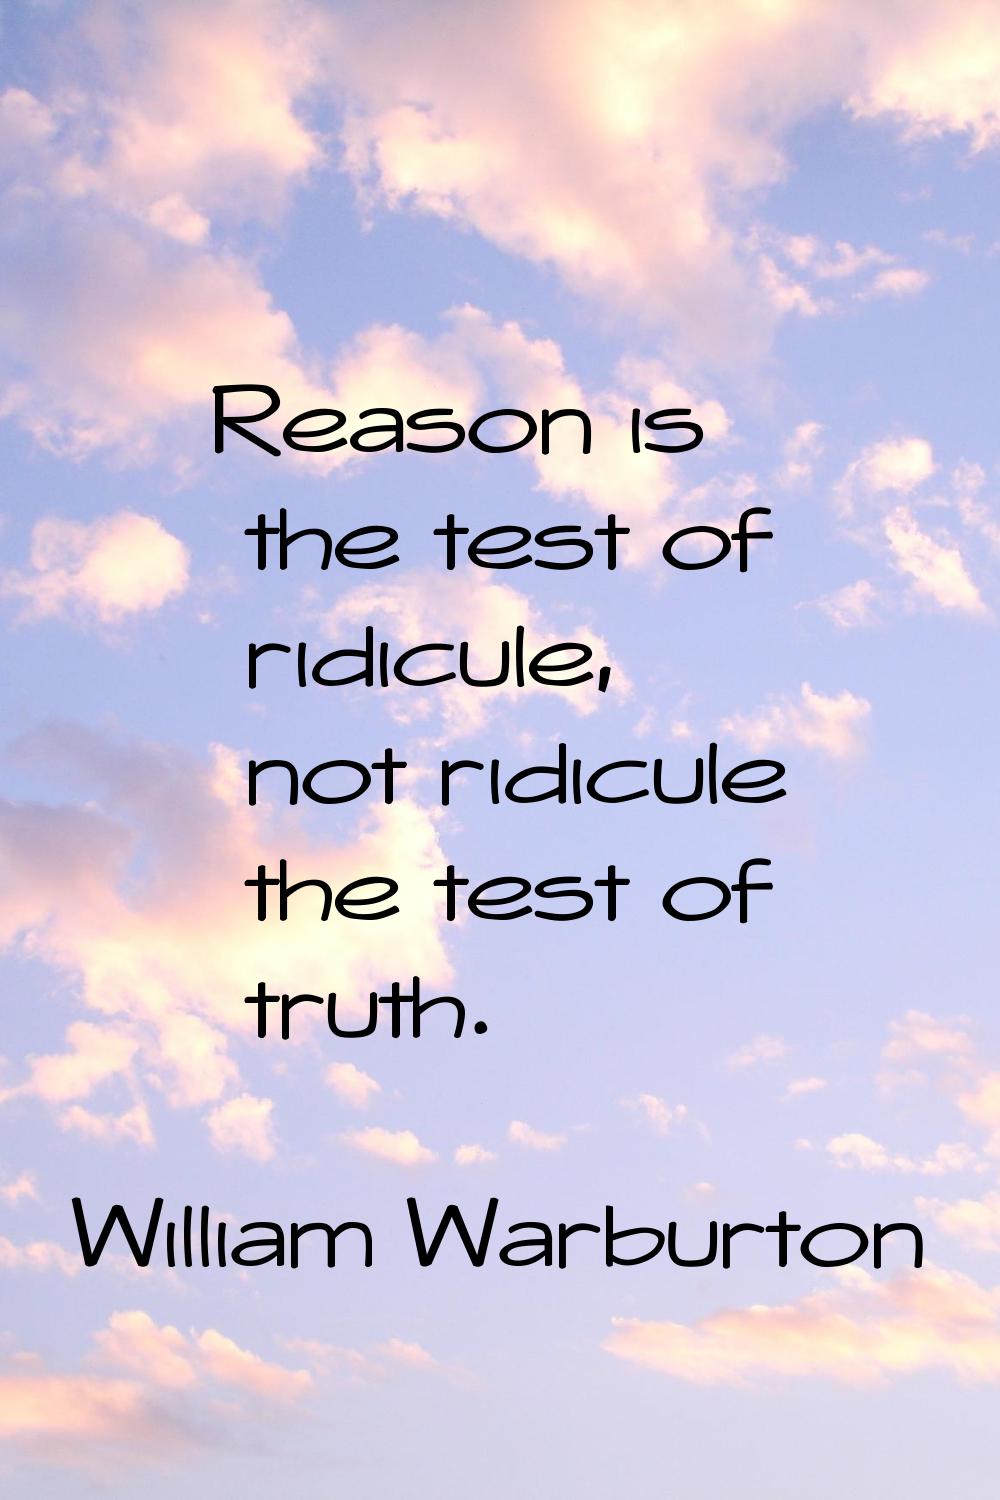 Reason is the test of ridicule, not ridicule the test of truth.